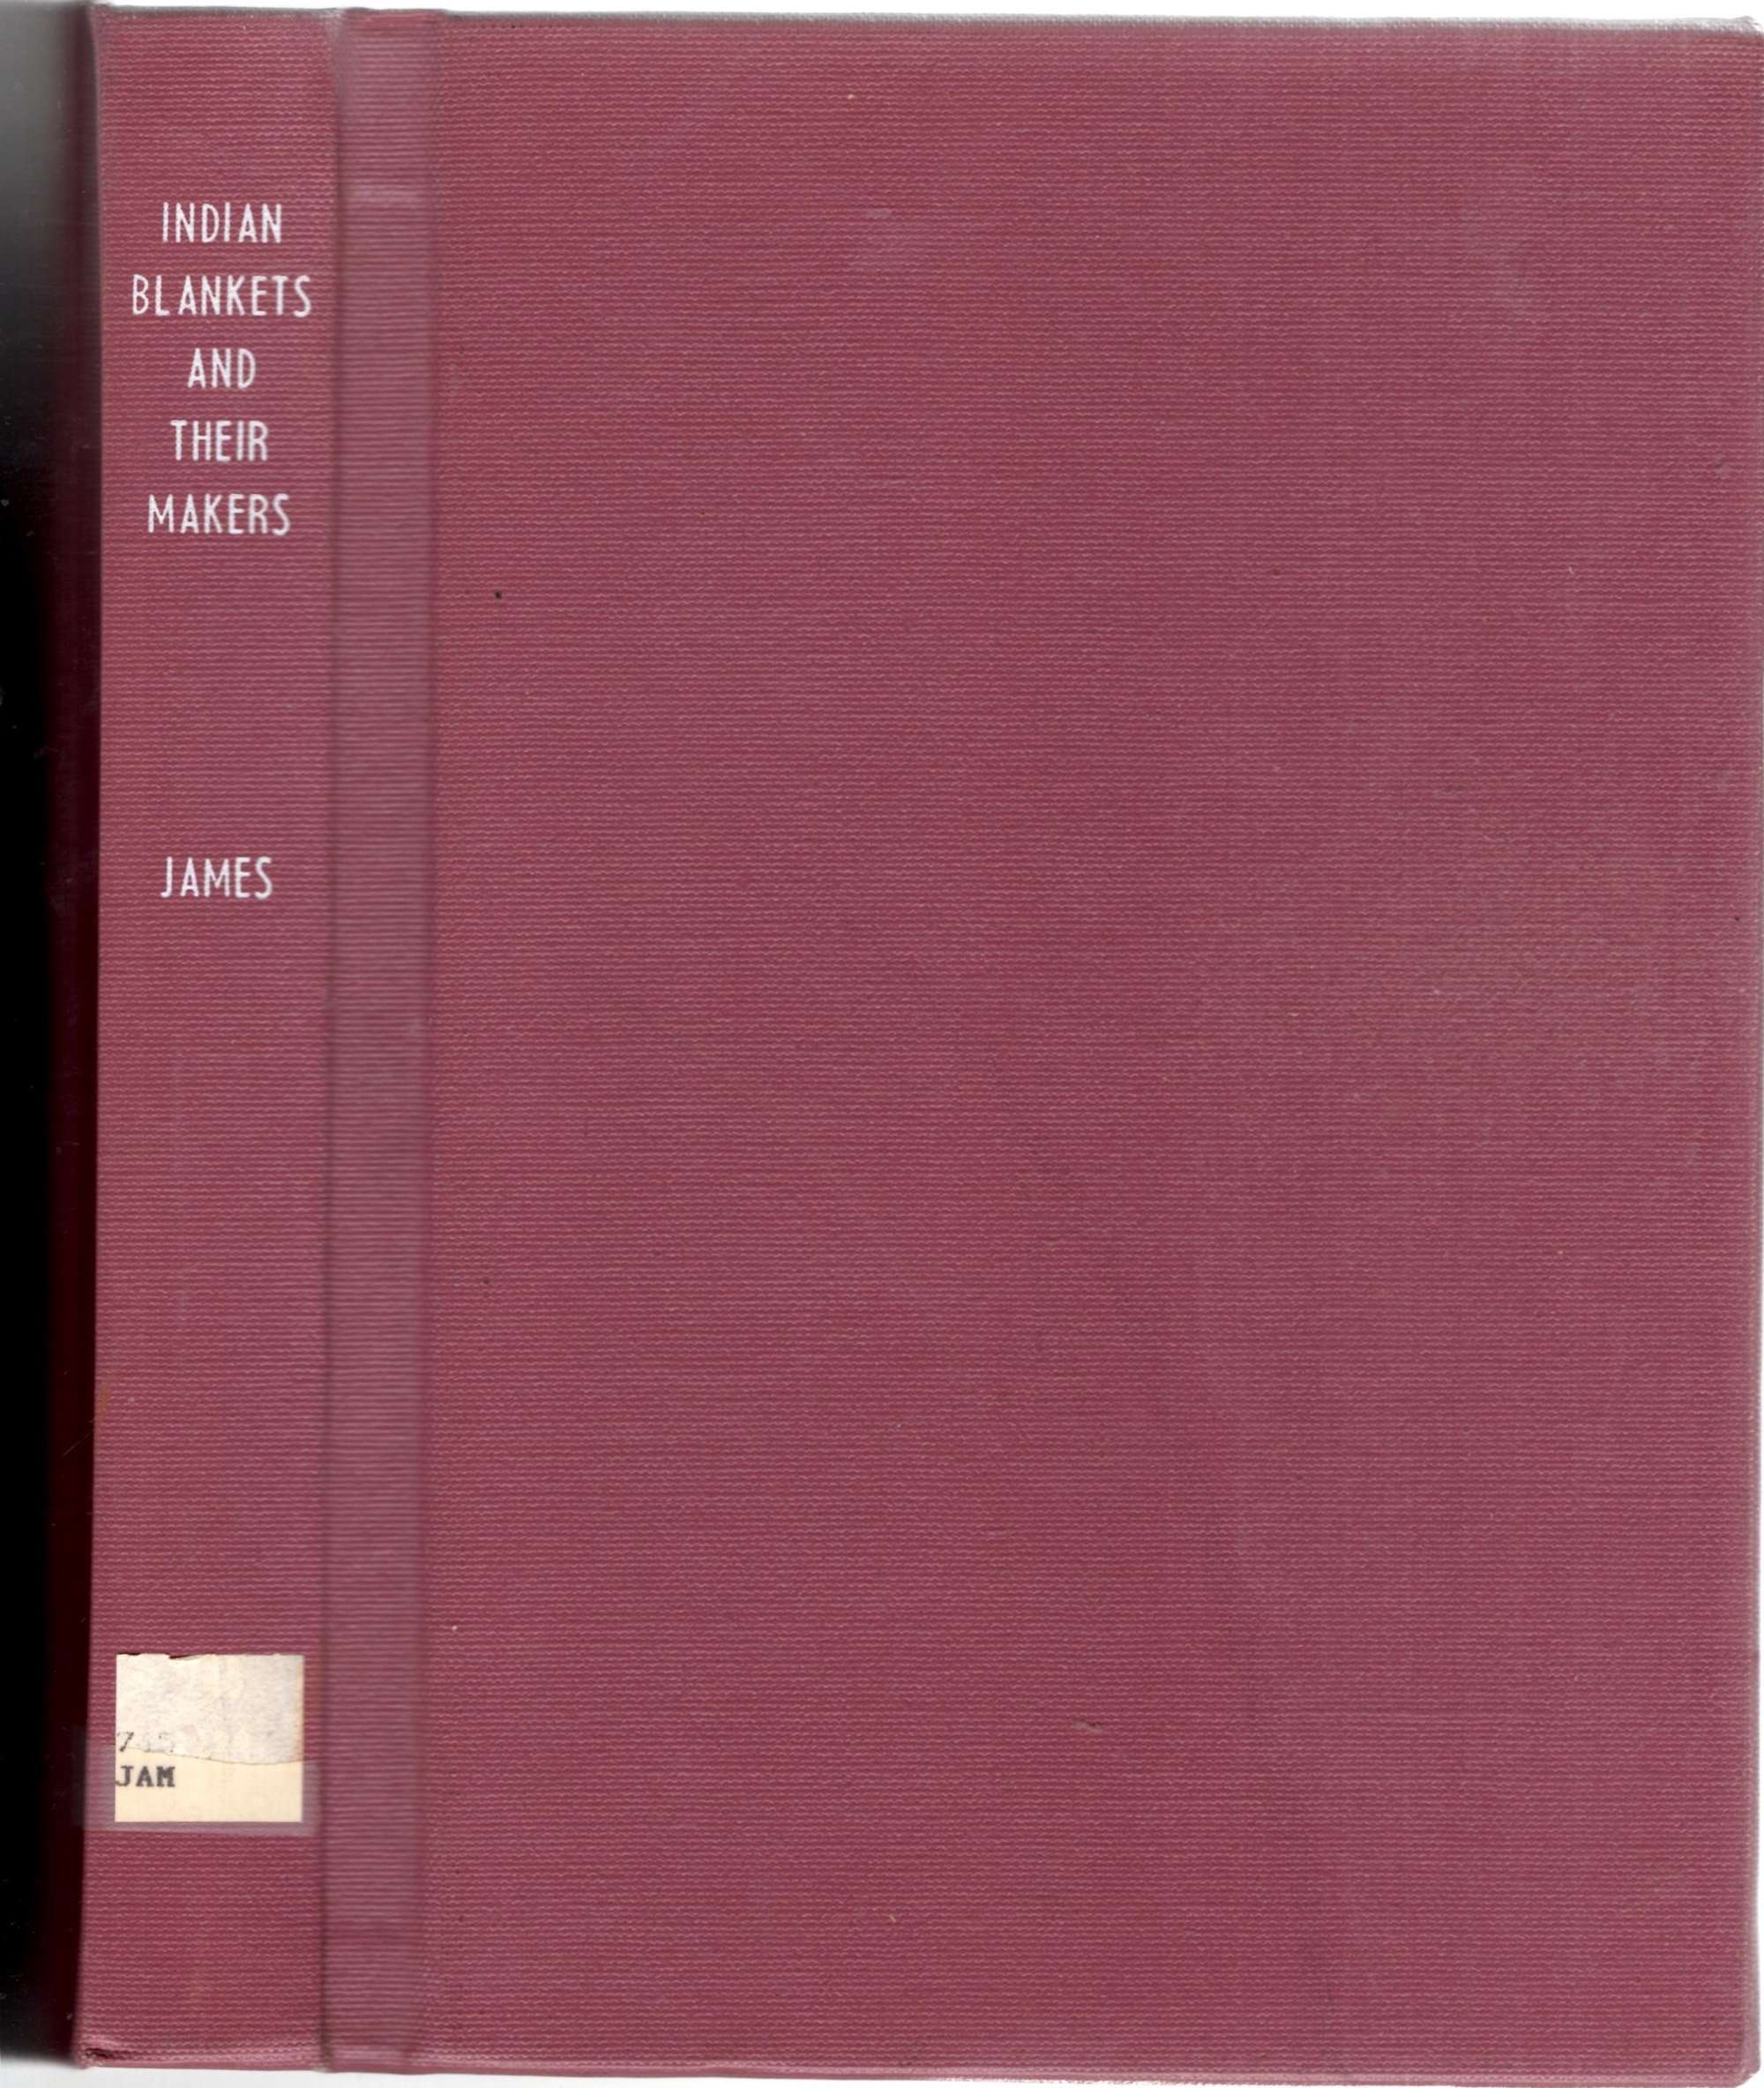 Indian Blankets and Their Makers by James, George Wharton: Ex-Lib Good  Hardcover (1937) Reprint. Book Booth